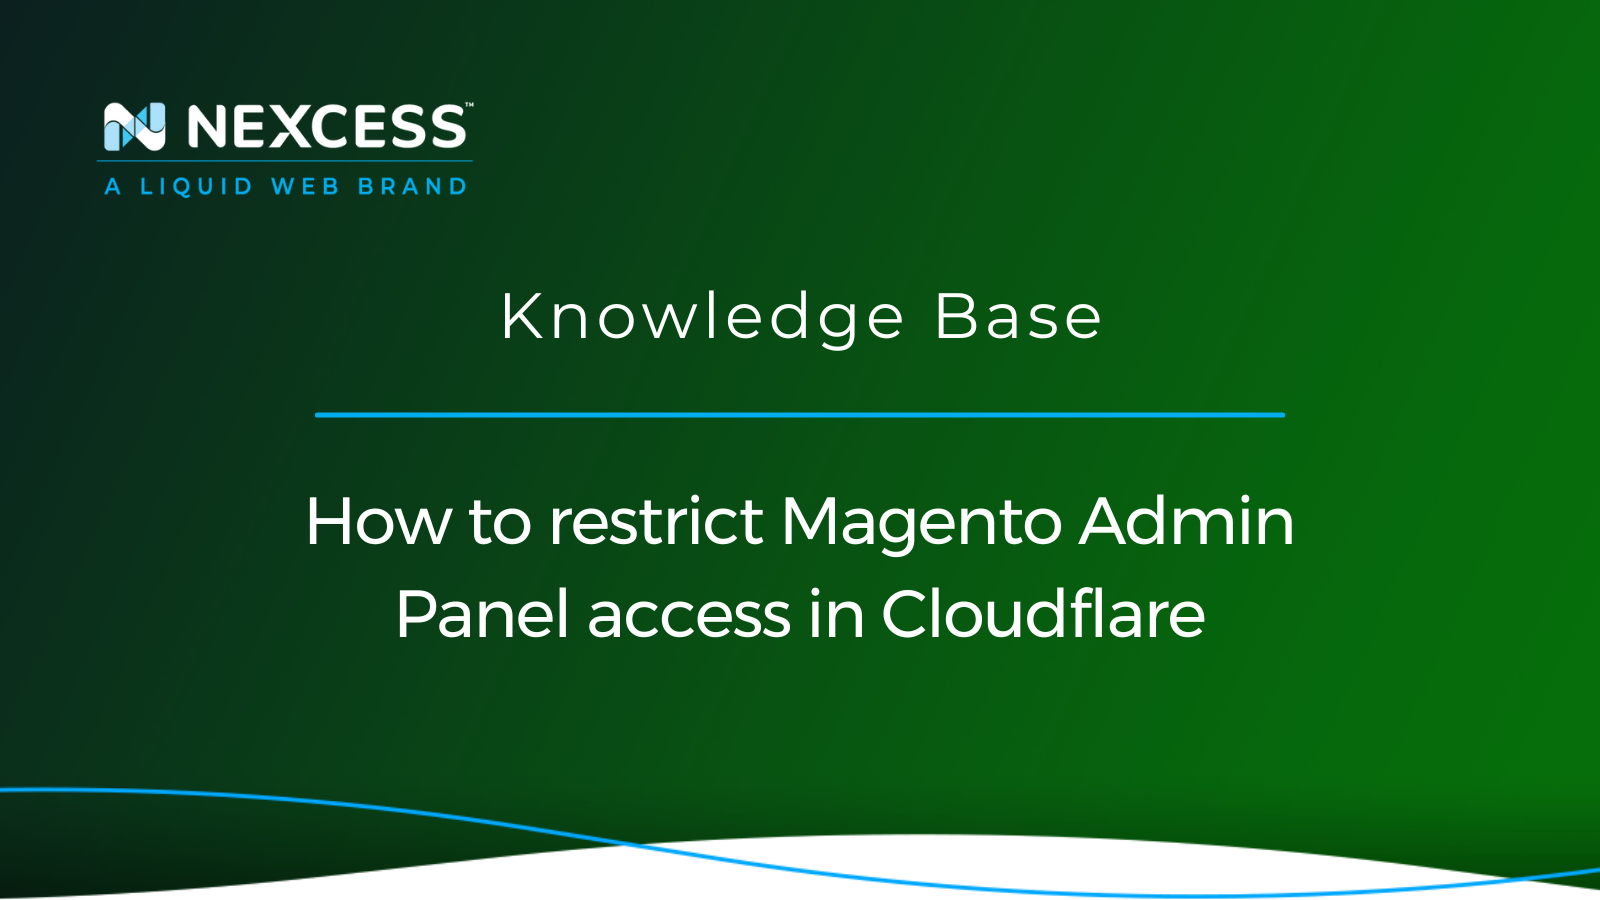 How to restrict Magento Admin Panel access in Cloudflare